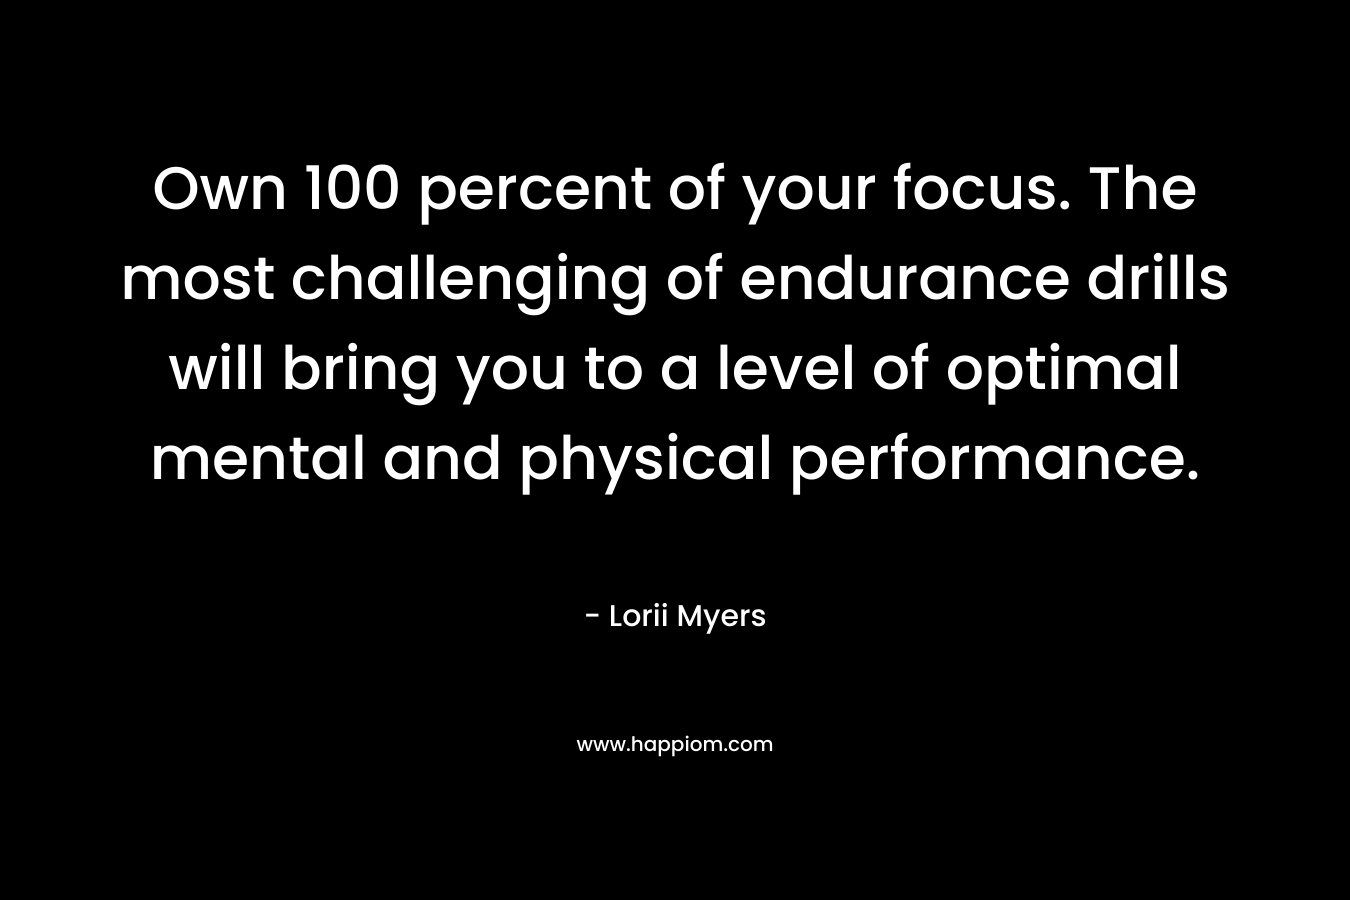 Own 100 percent of your focus. The most challenging of endurance drills will bring you to a level of optimal mental and physical performance. – Lorii Myers